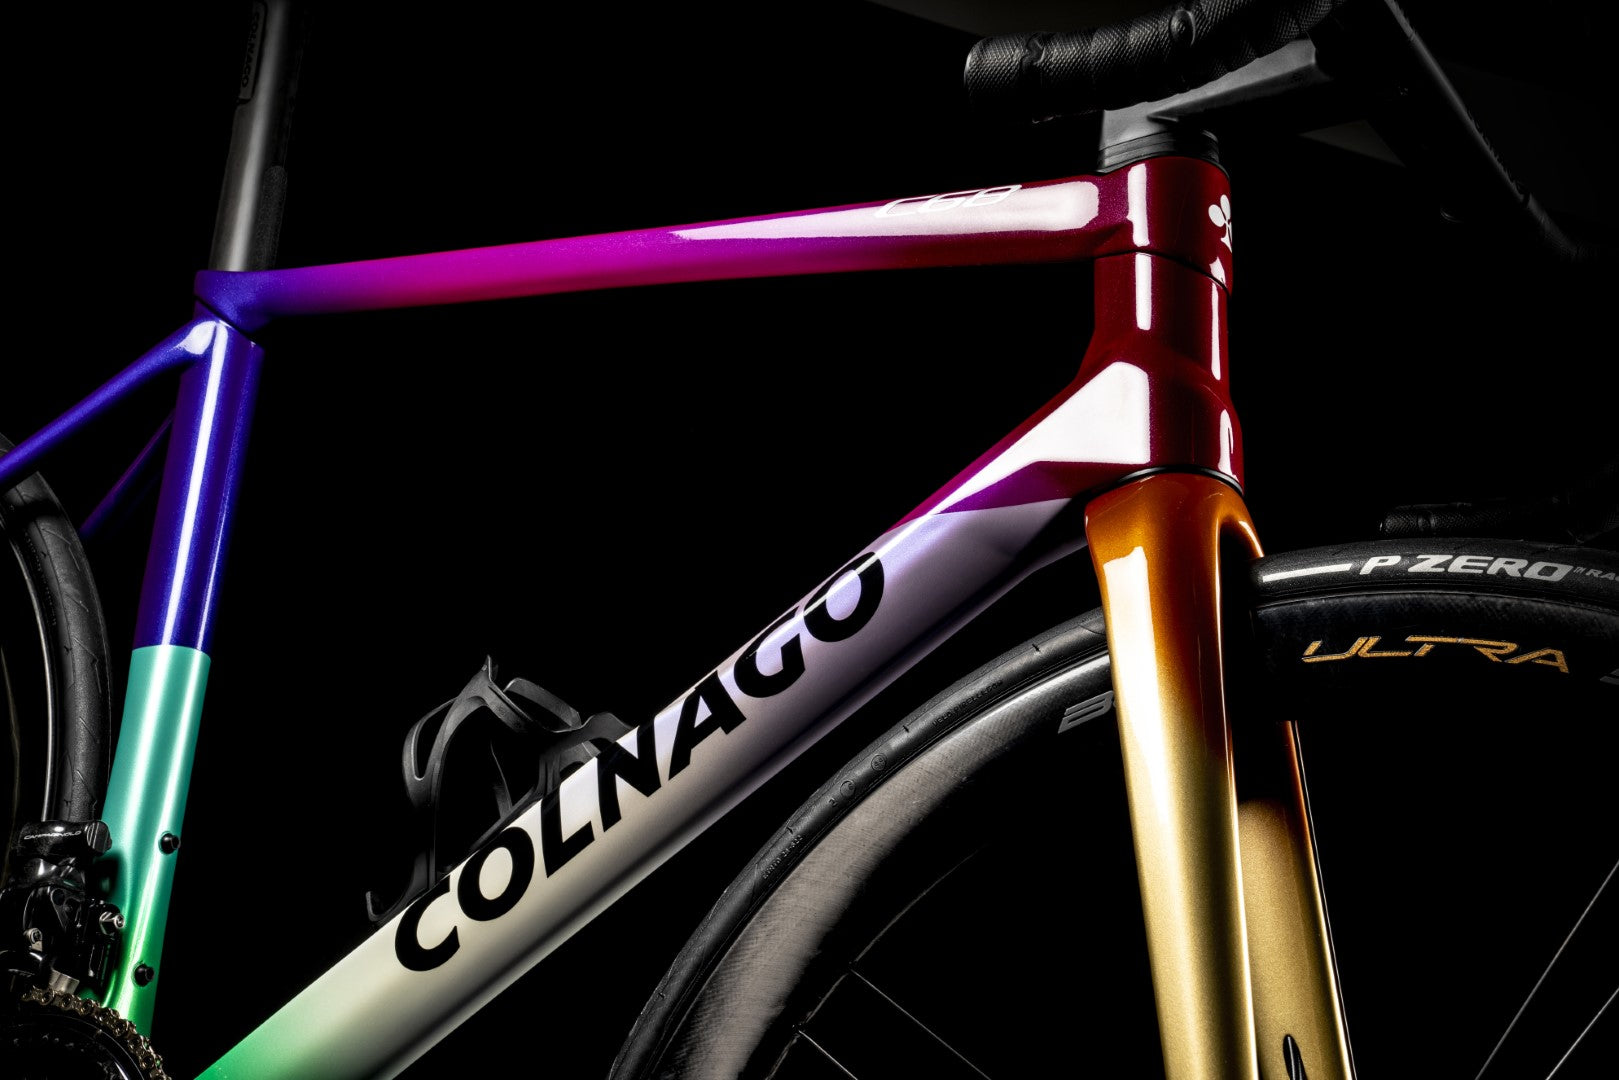 Motoki Yoshio x Colnago - Respect, Harmony and Colors live together in an artistic version of the C68